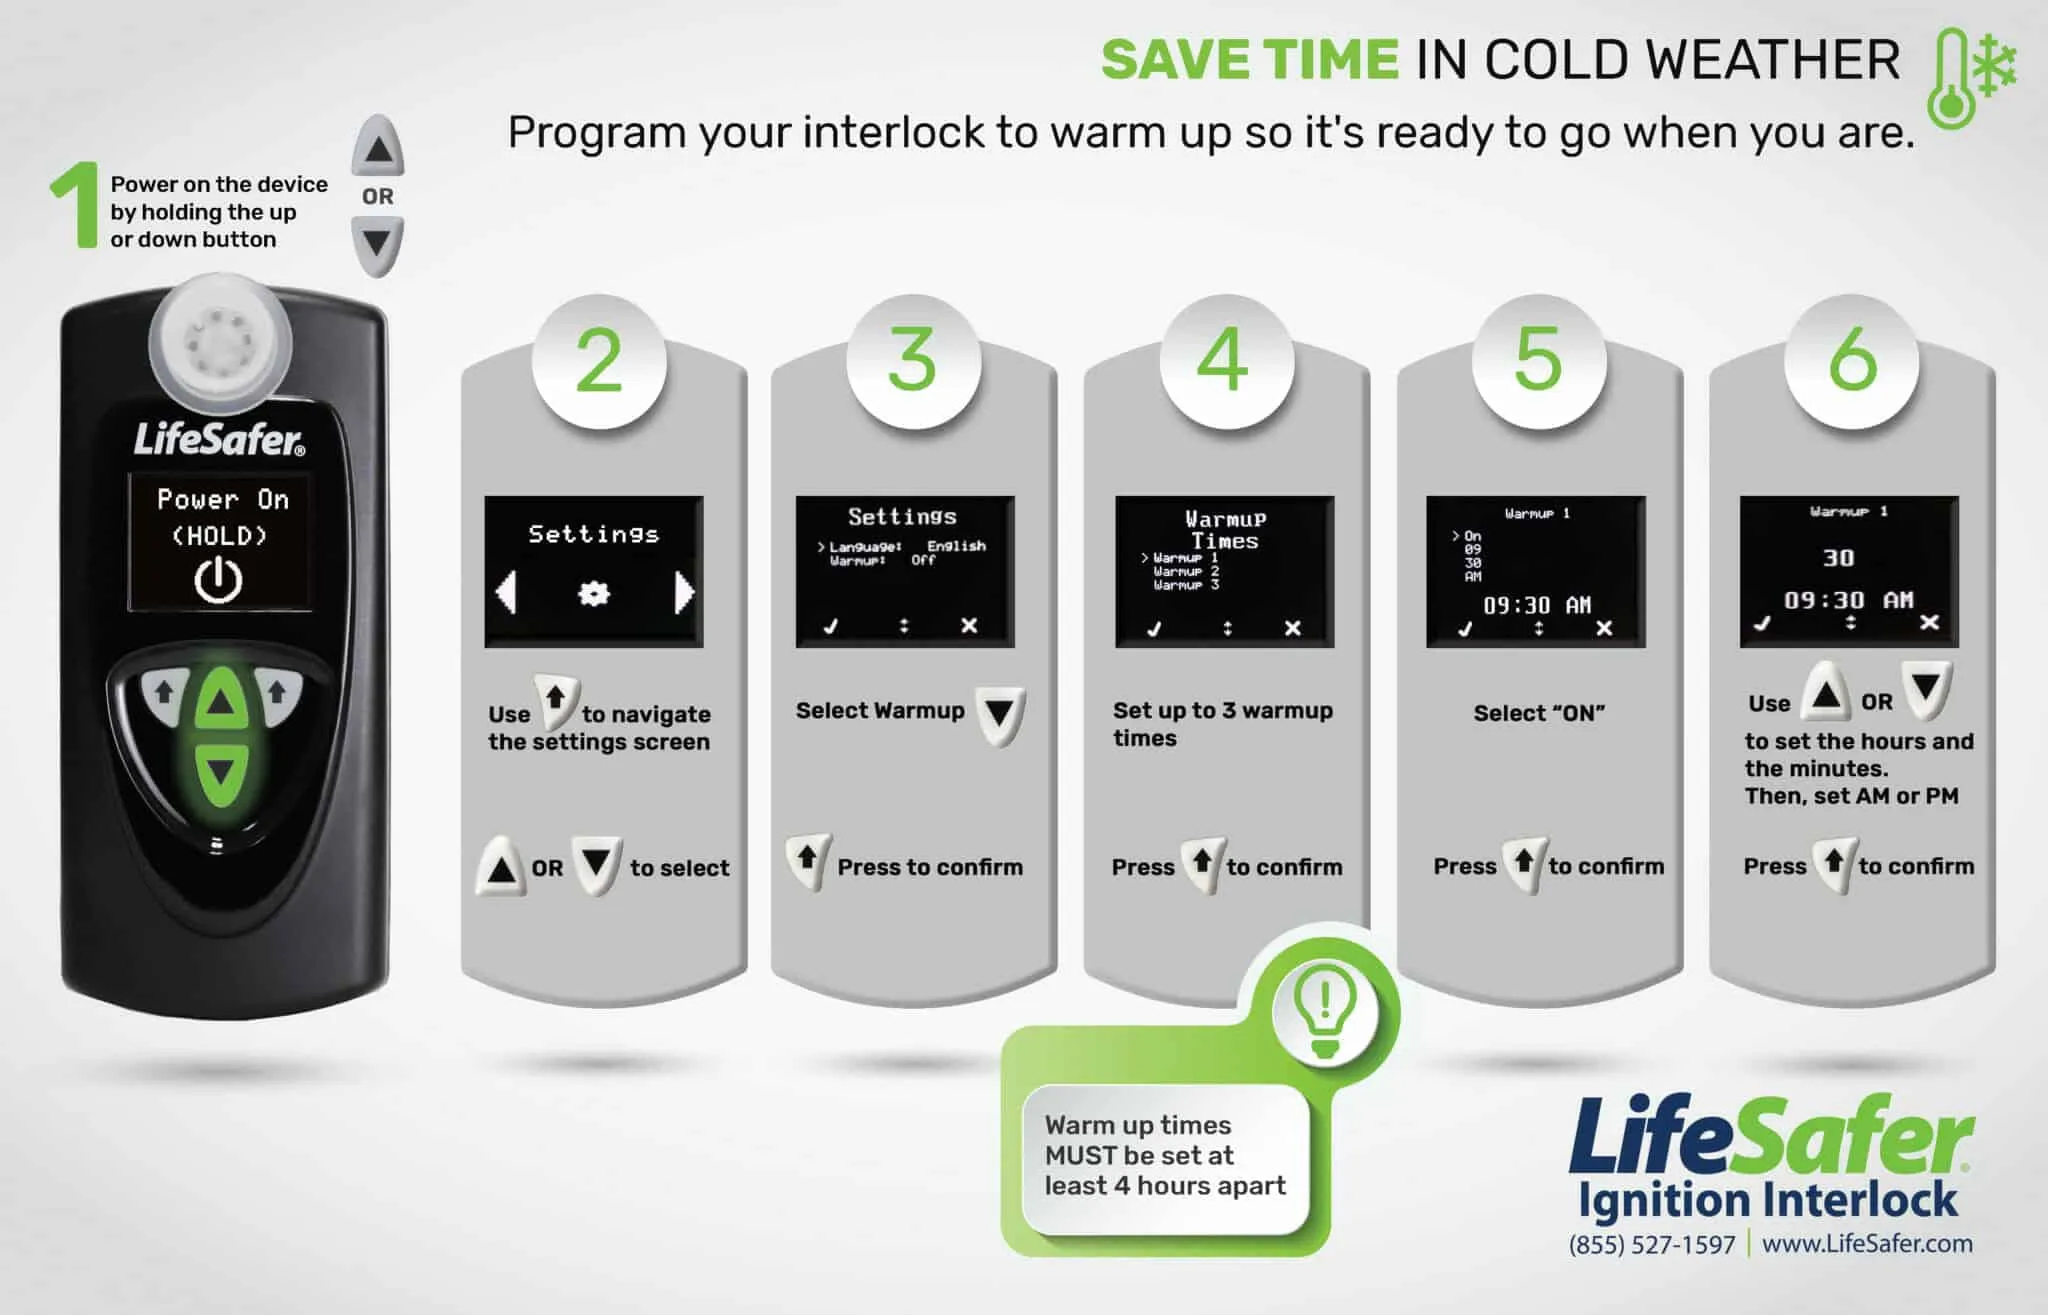 LifeSafer Ignition Interlock Warm Up Times Graphic Step by Step